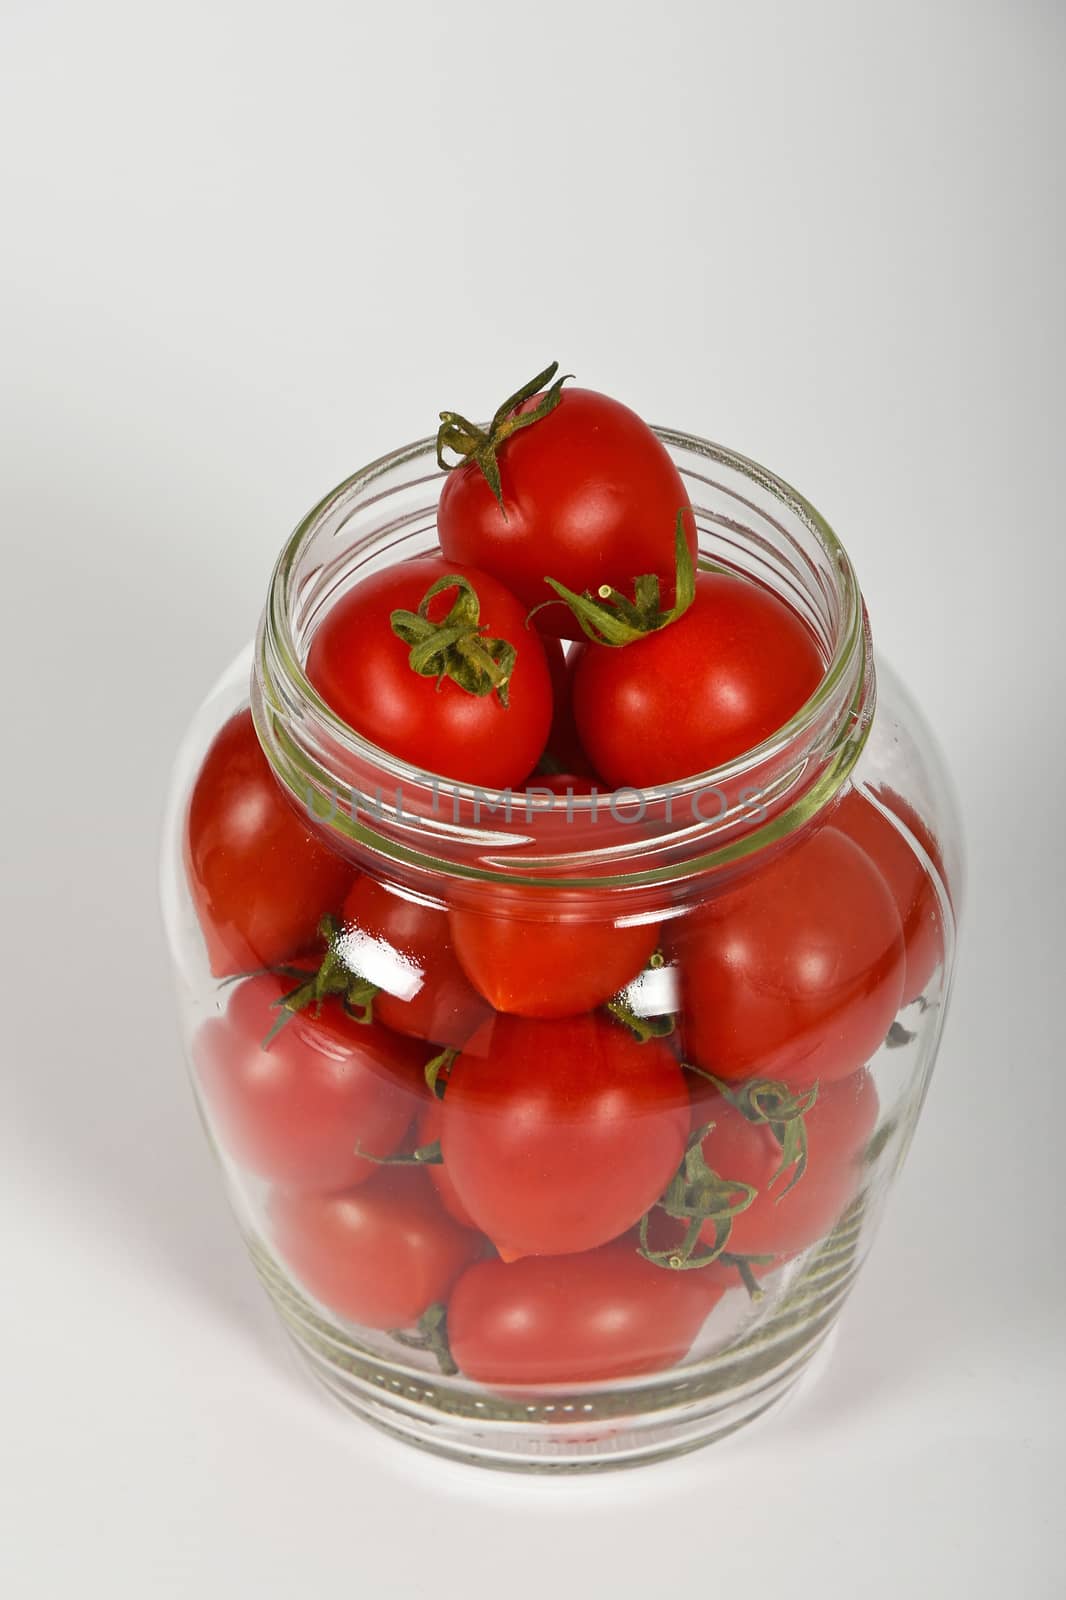 Glass jar full of red cherry tomatoes ready to pickle for conservation over white background, high angle view, close up